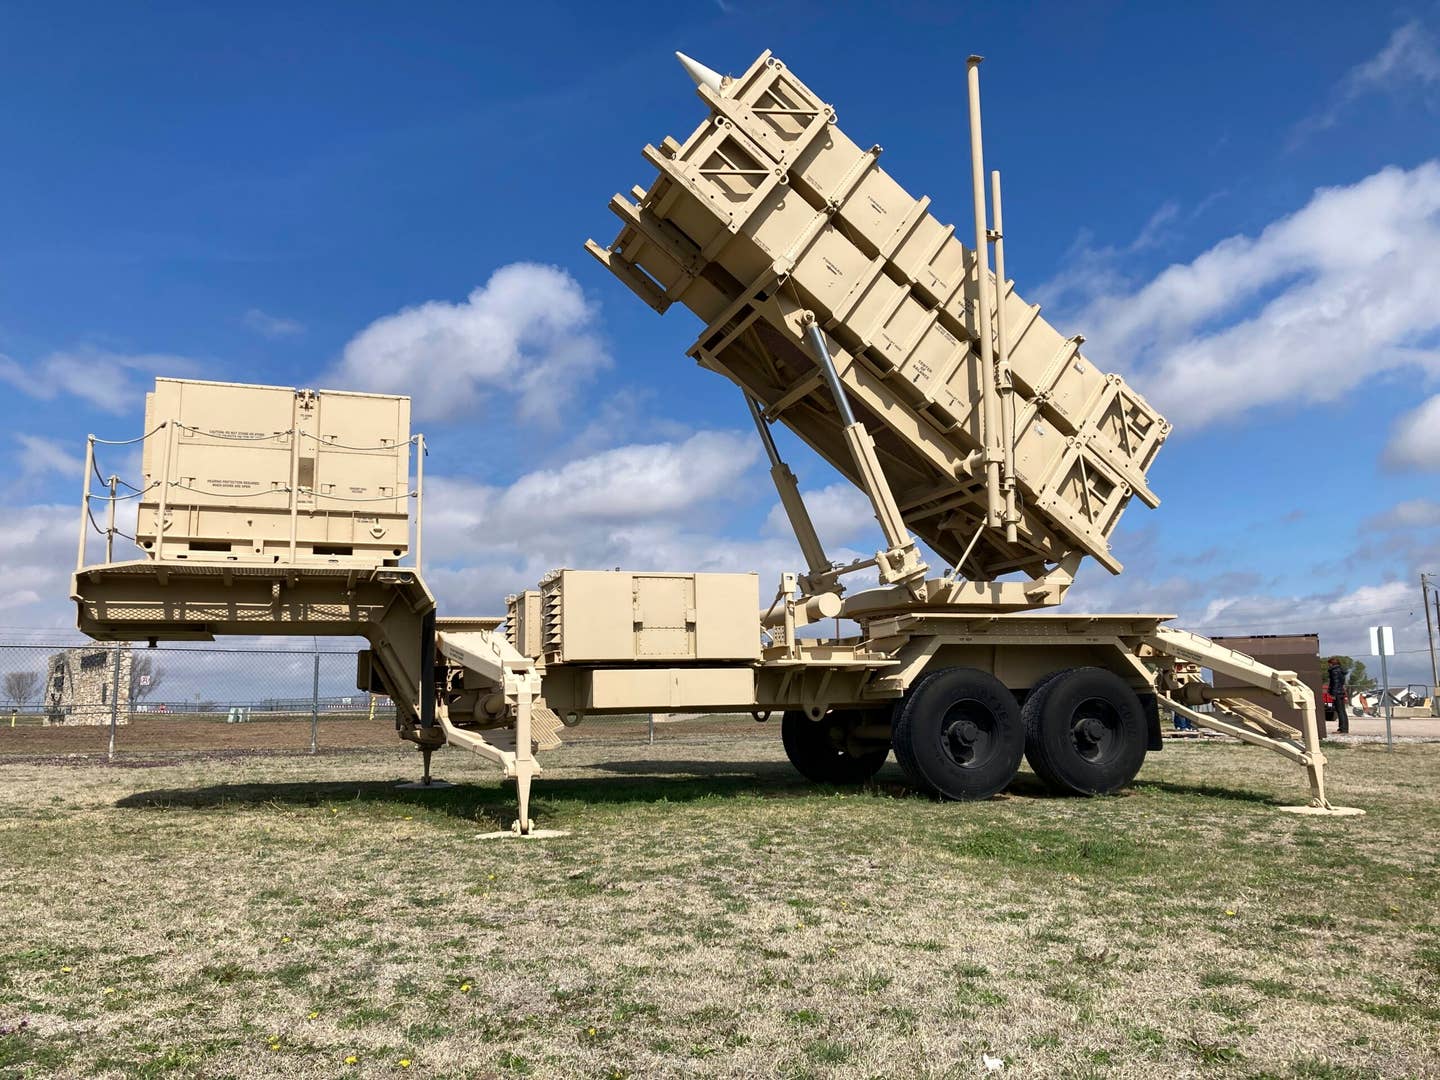 A Patriot missile mobile launcher is displayed outside the Fort Sill Army Post near Lawton, Okla., on Tuesday, March 21, 2023. (AP Photo/Sean Murphy)